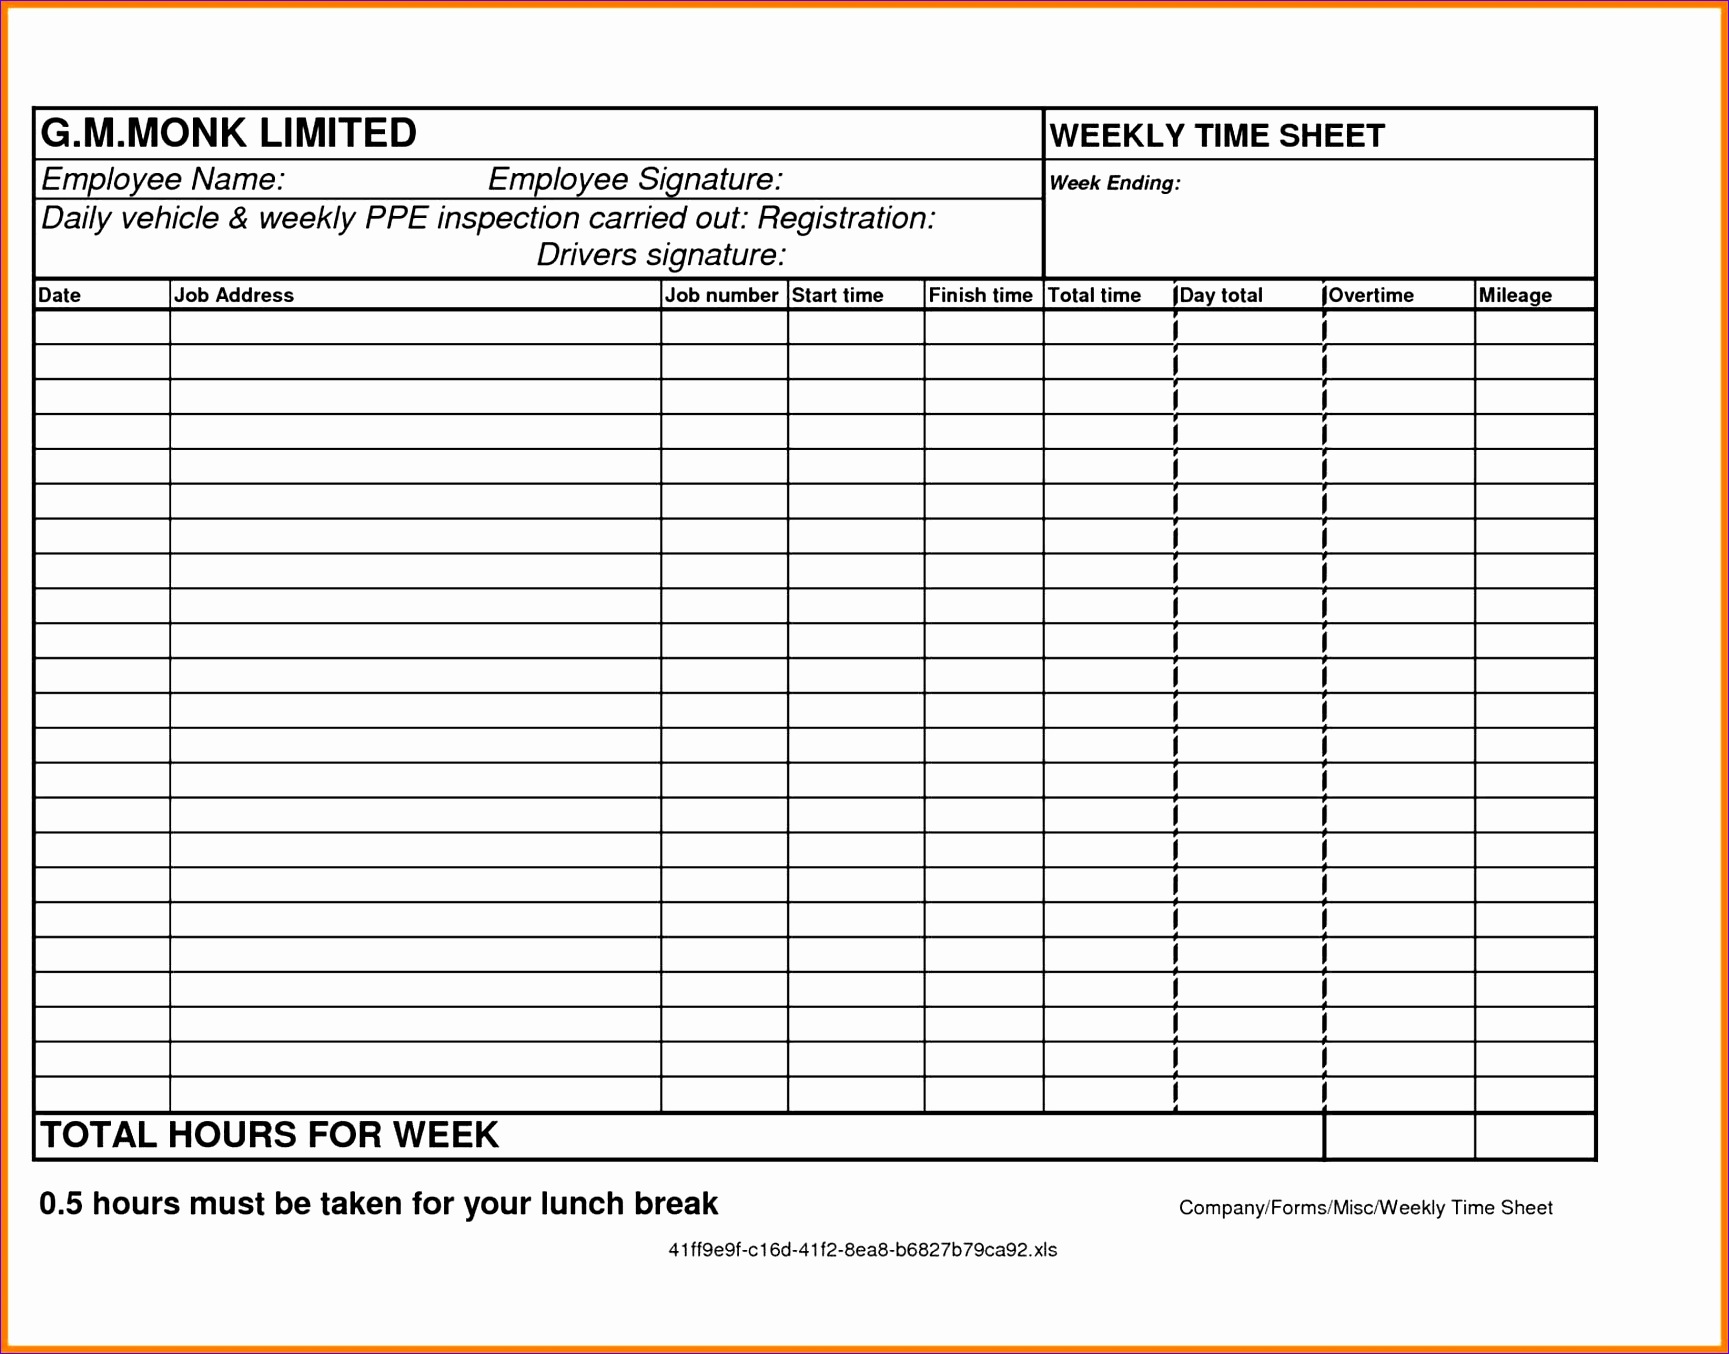 timesheet Timecard Calculator With Lunch calculator with lunch break procedure template sample free online wolfskinmall free Timecard Calculator With Lunch online